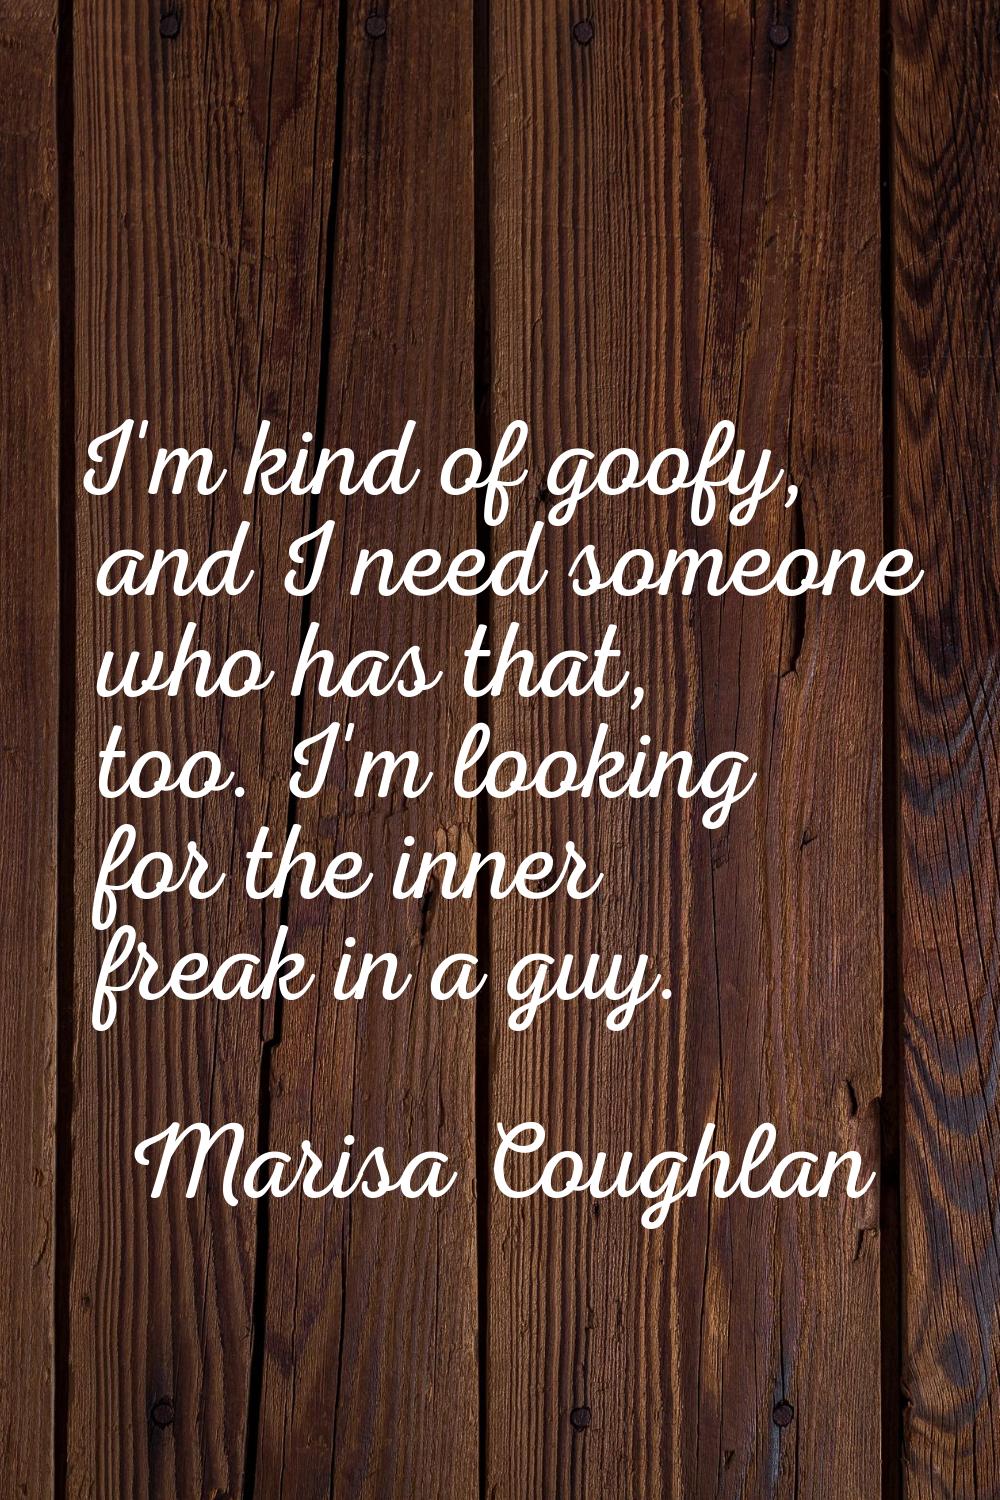 I'm kind of goofy, and I need someone who has that, too. I'm looking for the inner freak in a guy.